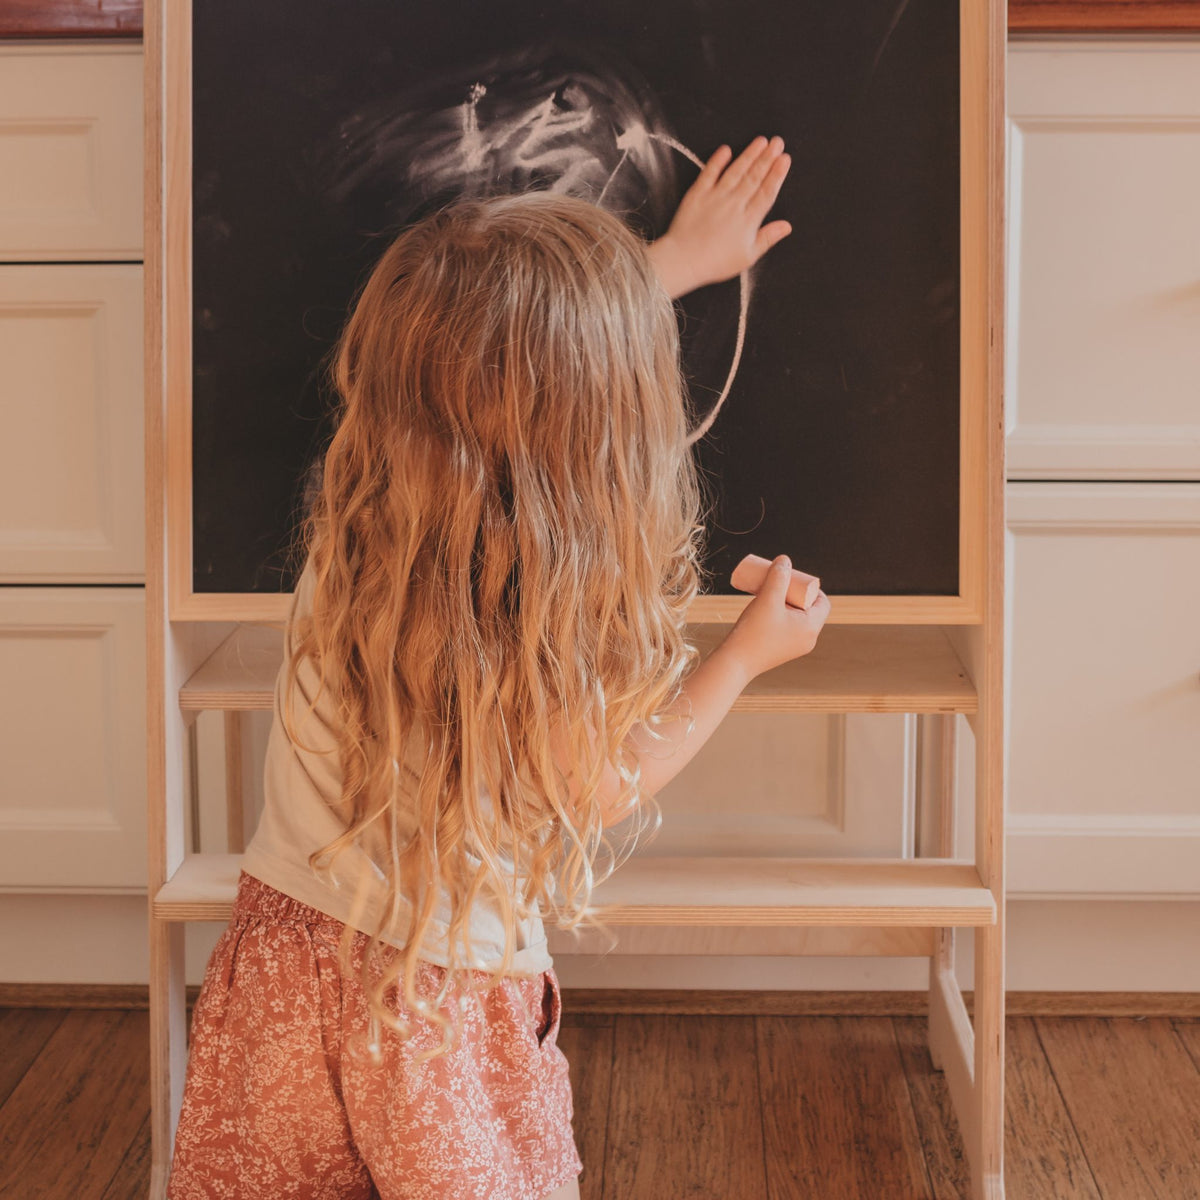 Image of a child with her back to camera, long blonde hair, drawing on with chalk on a handmade wooden chalkboard